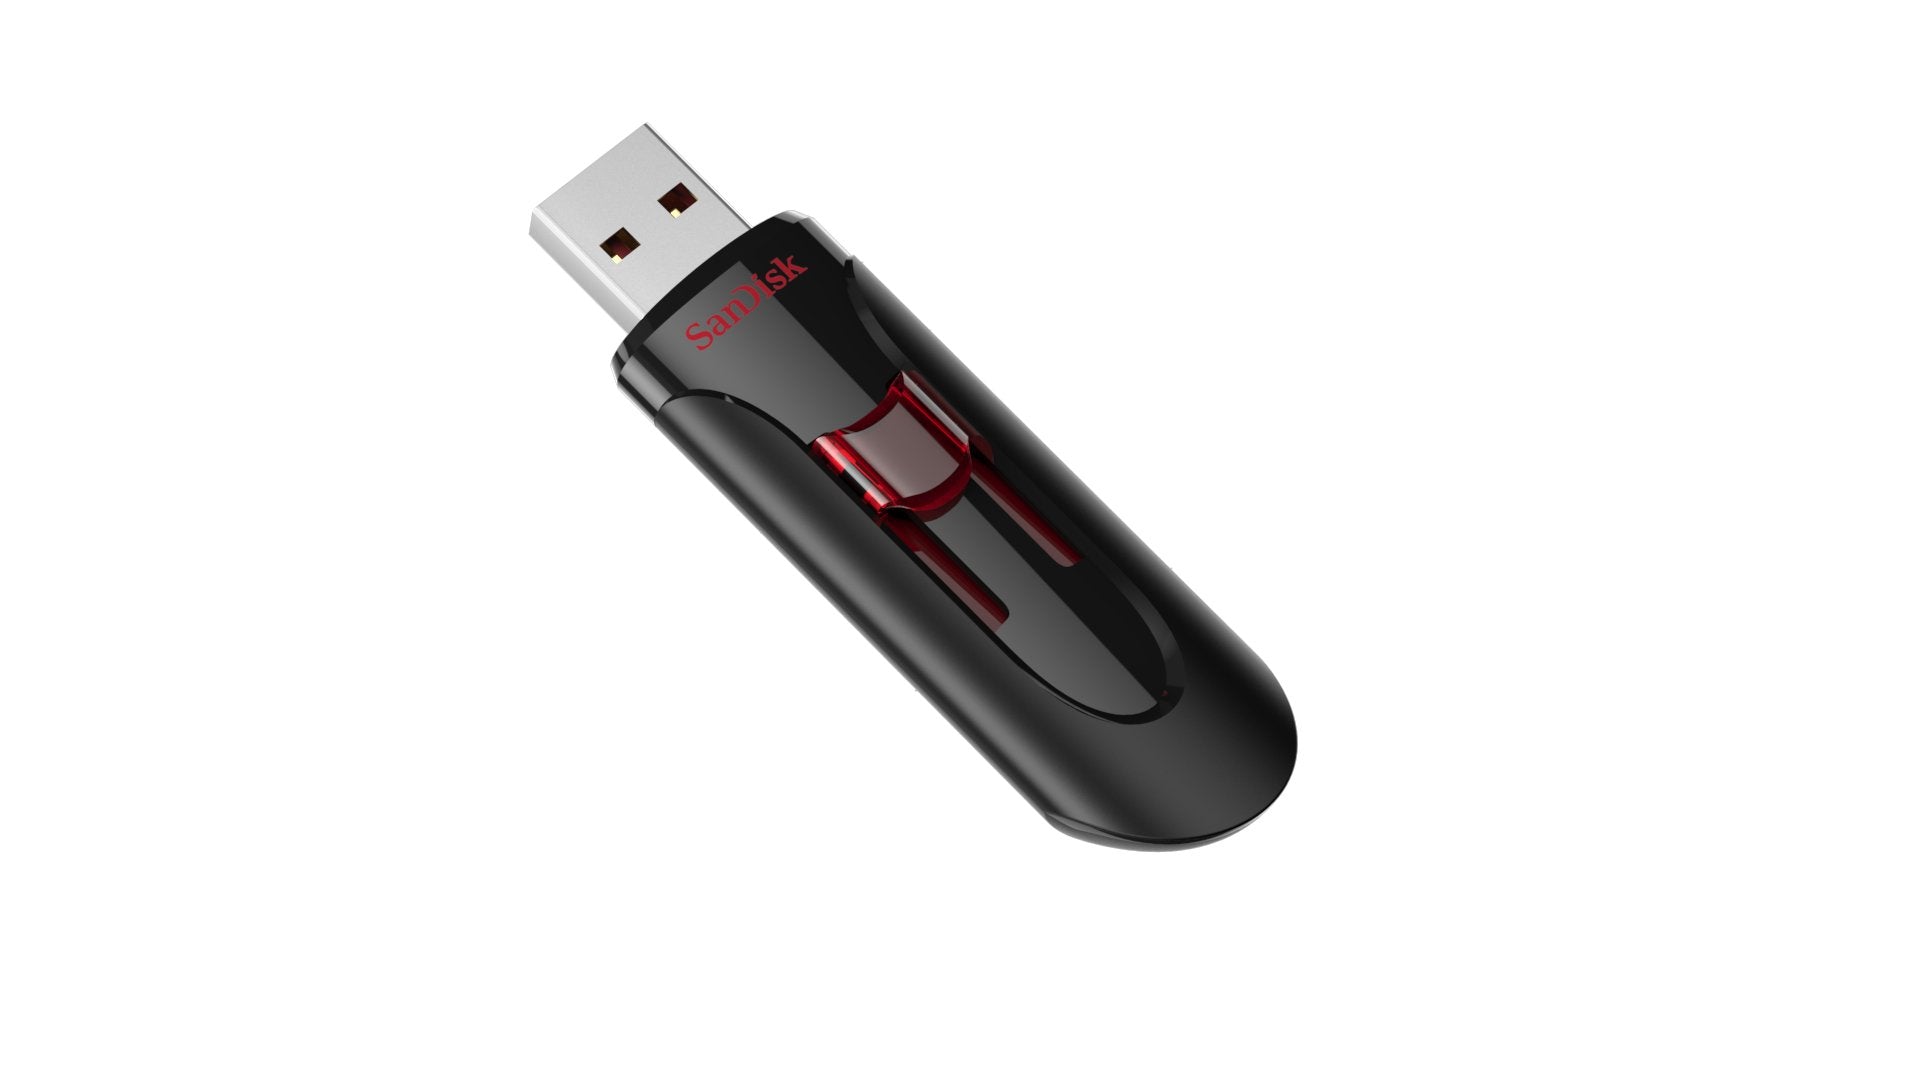 SanDisk Cruzer Glide 256GB USB 3.0 Flash Drive SDCZ600-256G-G35 with BlueProton Lanyard (Pack of 2, 512MB Total Storage)